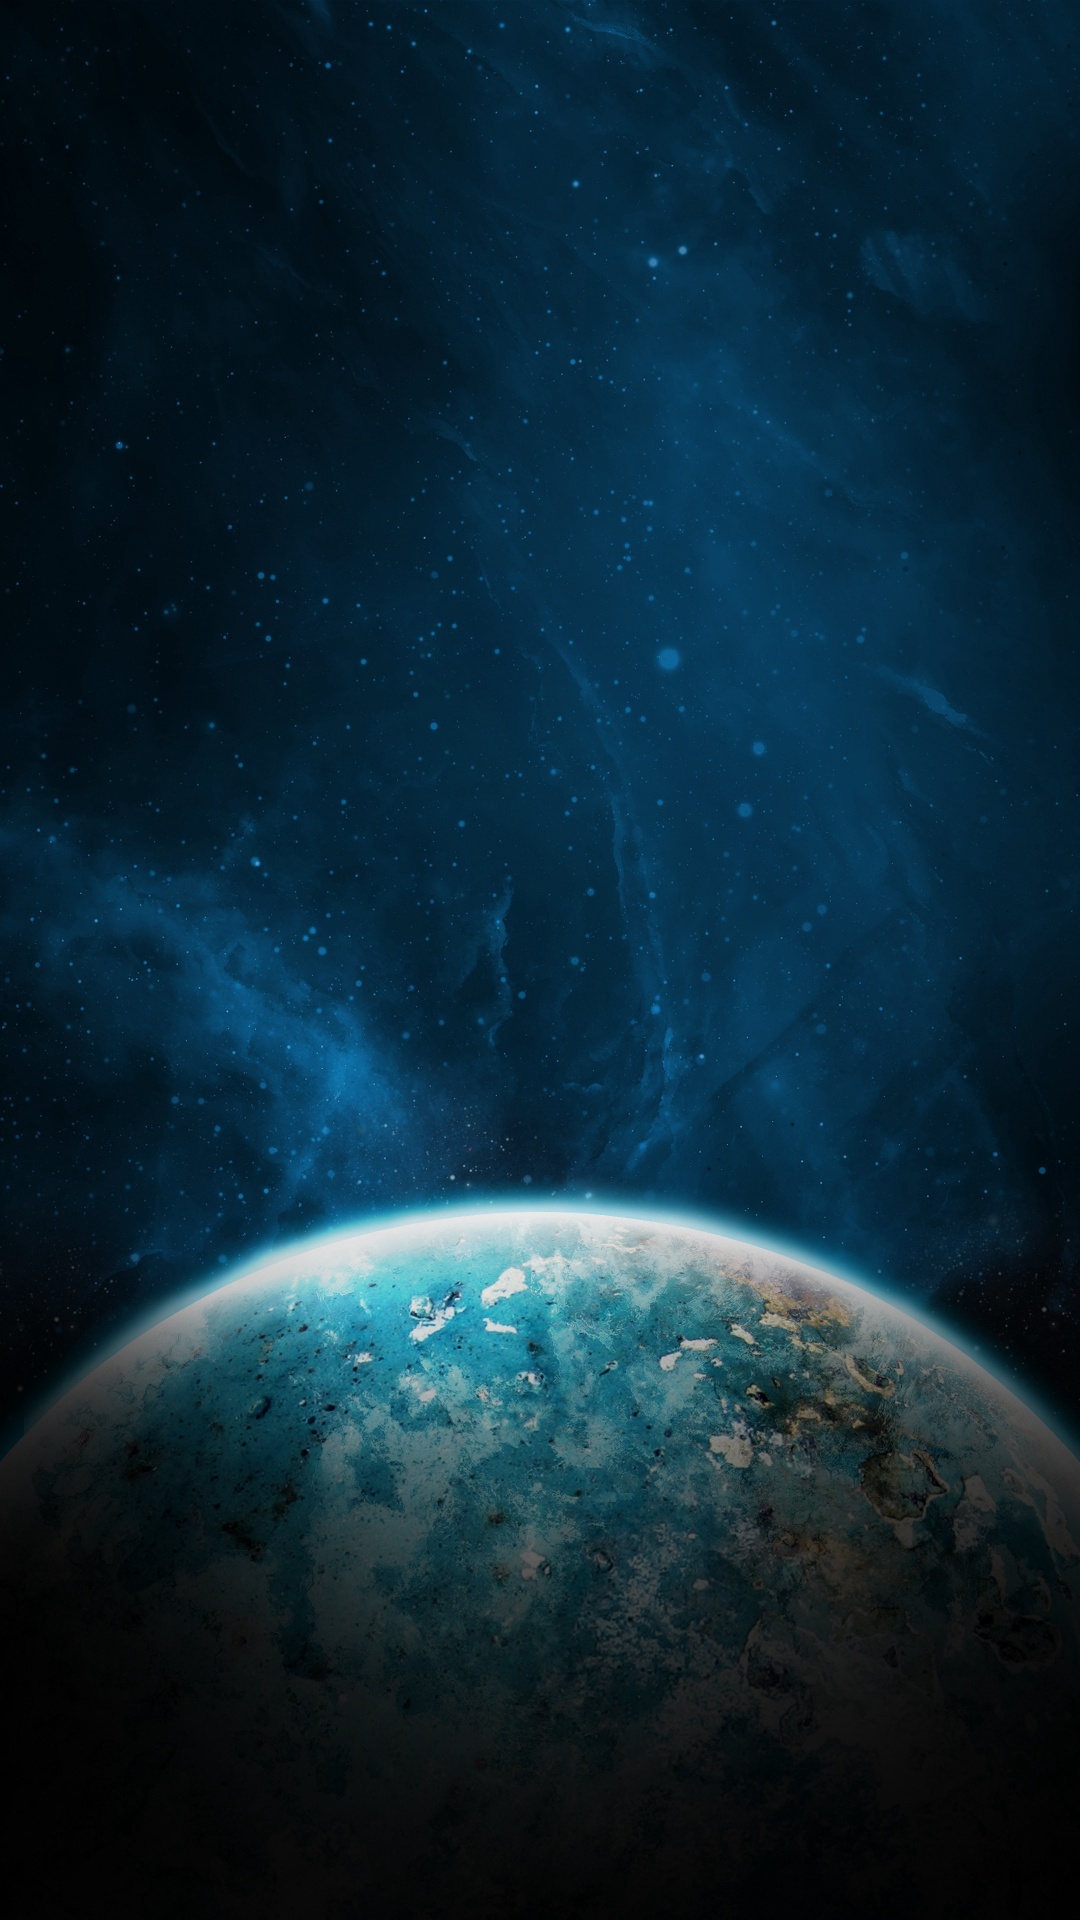 Blue and Black Planet With Stars. Wallpaper in 1080x1920 Resolution